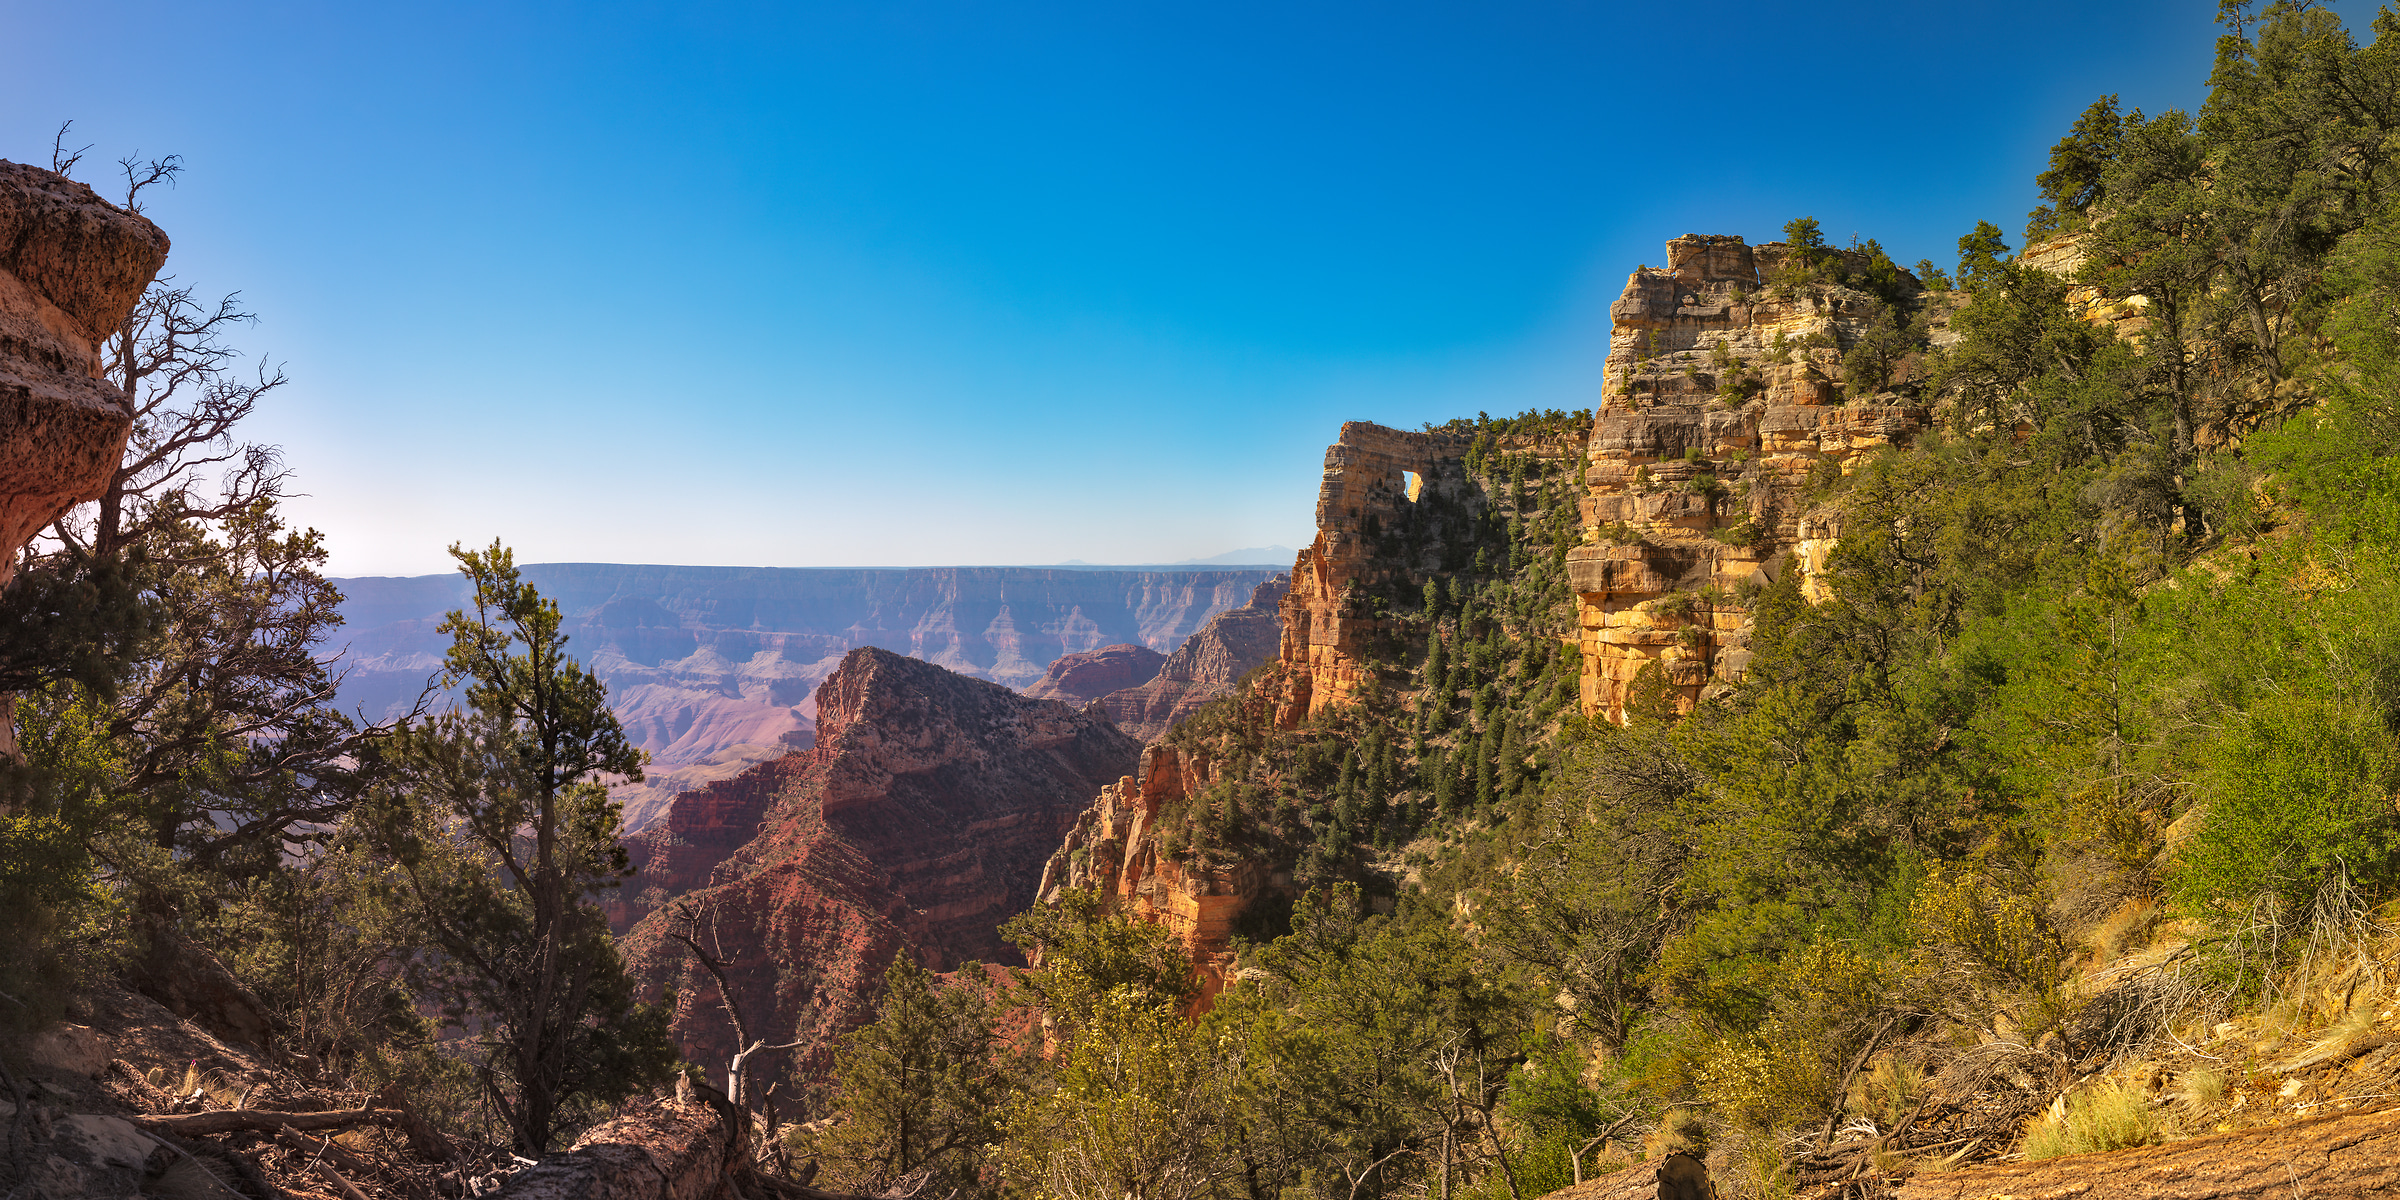 615 megapixels! A very high resolution, large-format VAST photo print of Angles Window at the Grand Canyon; landscape photograph created by John Freeman in Cape Royal, North Rim, Grand Canyon National Park, Arizona